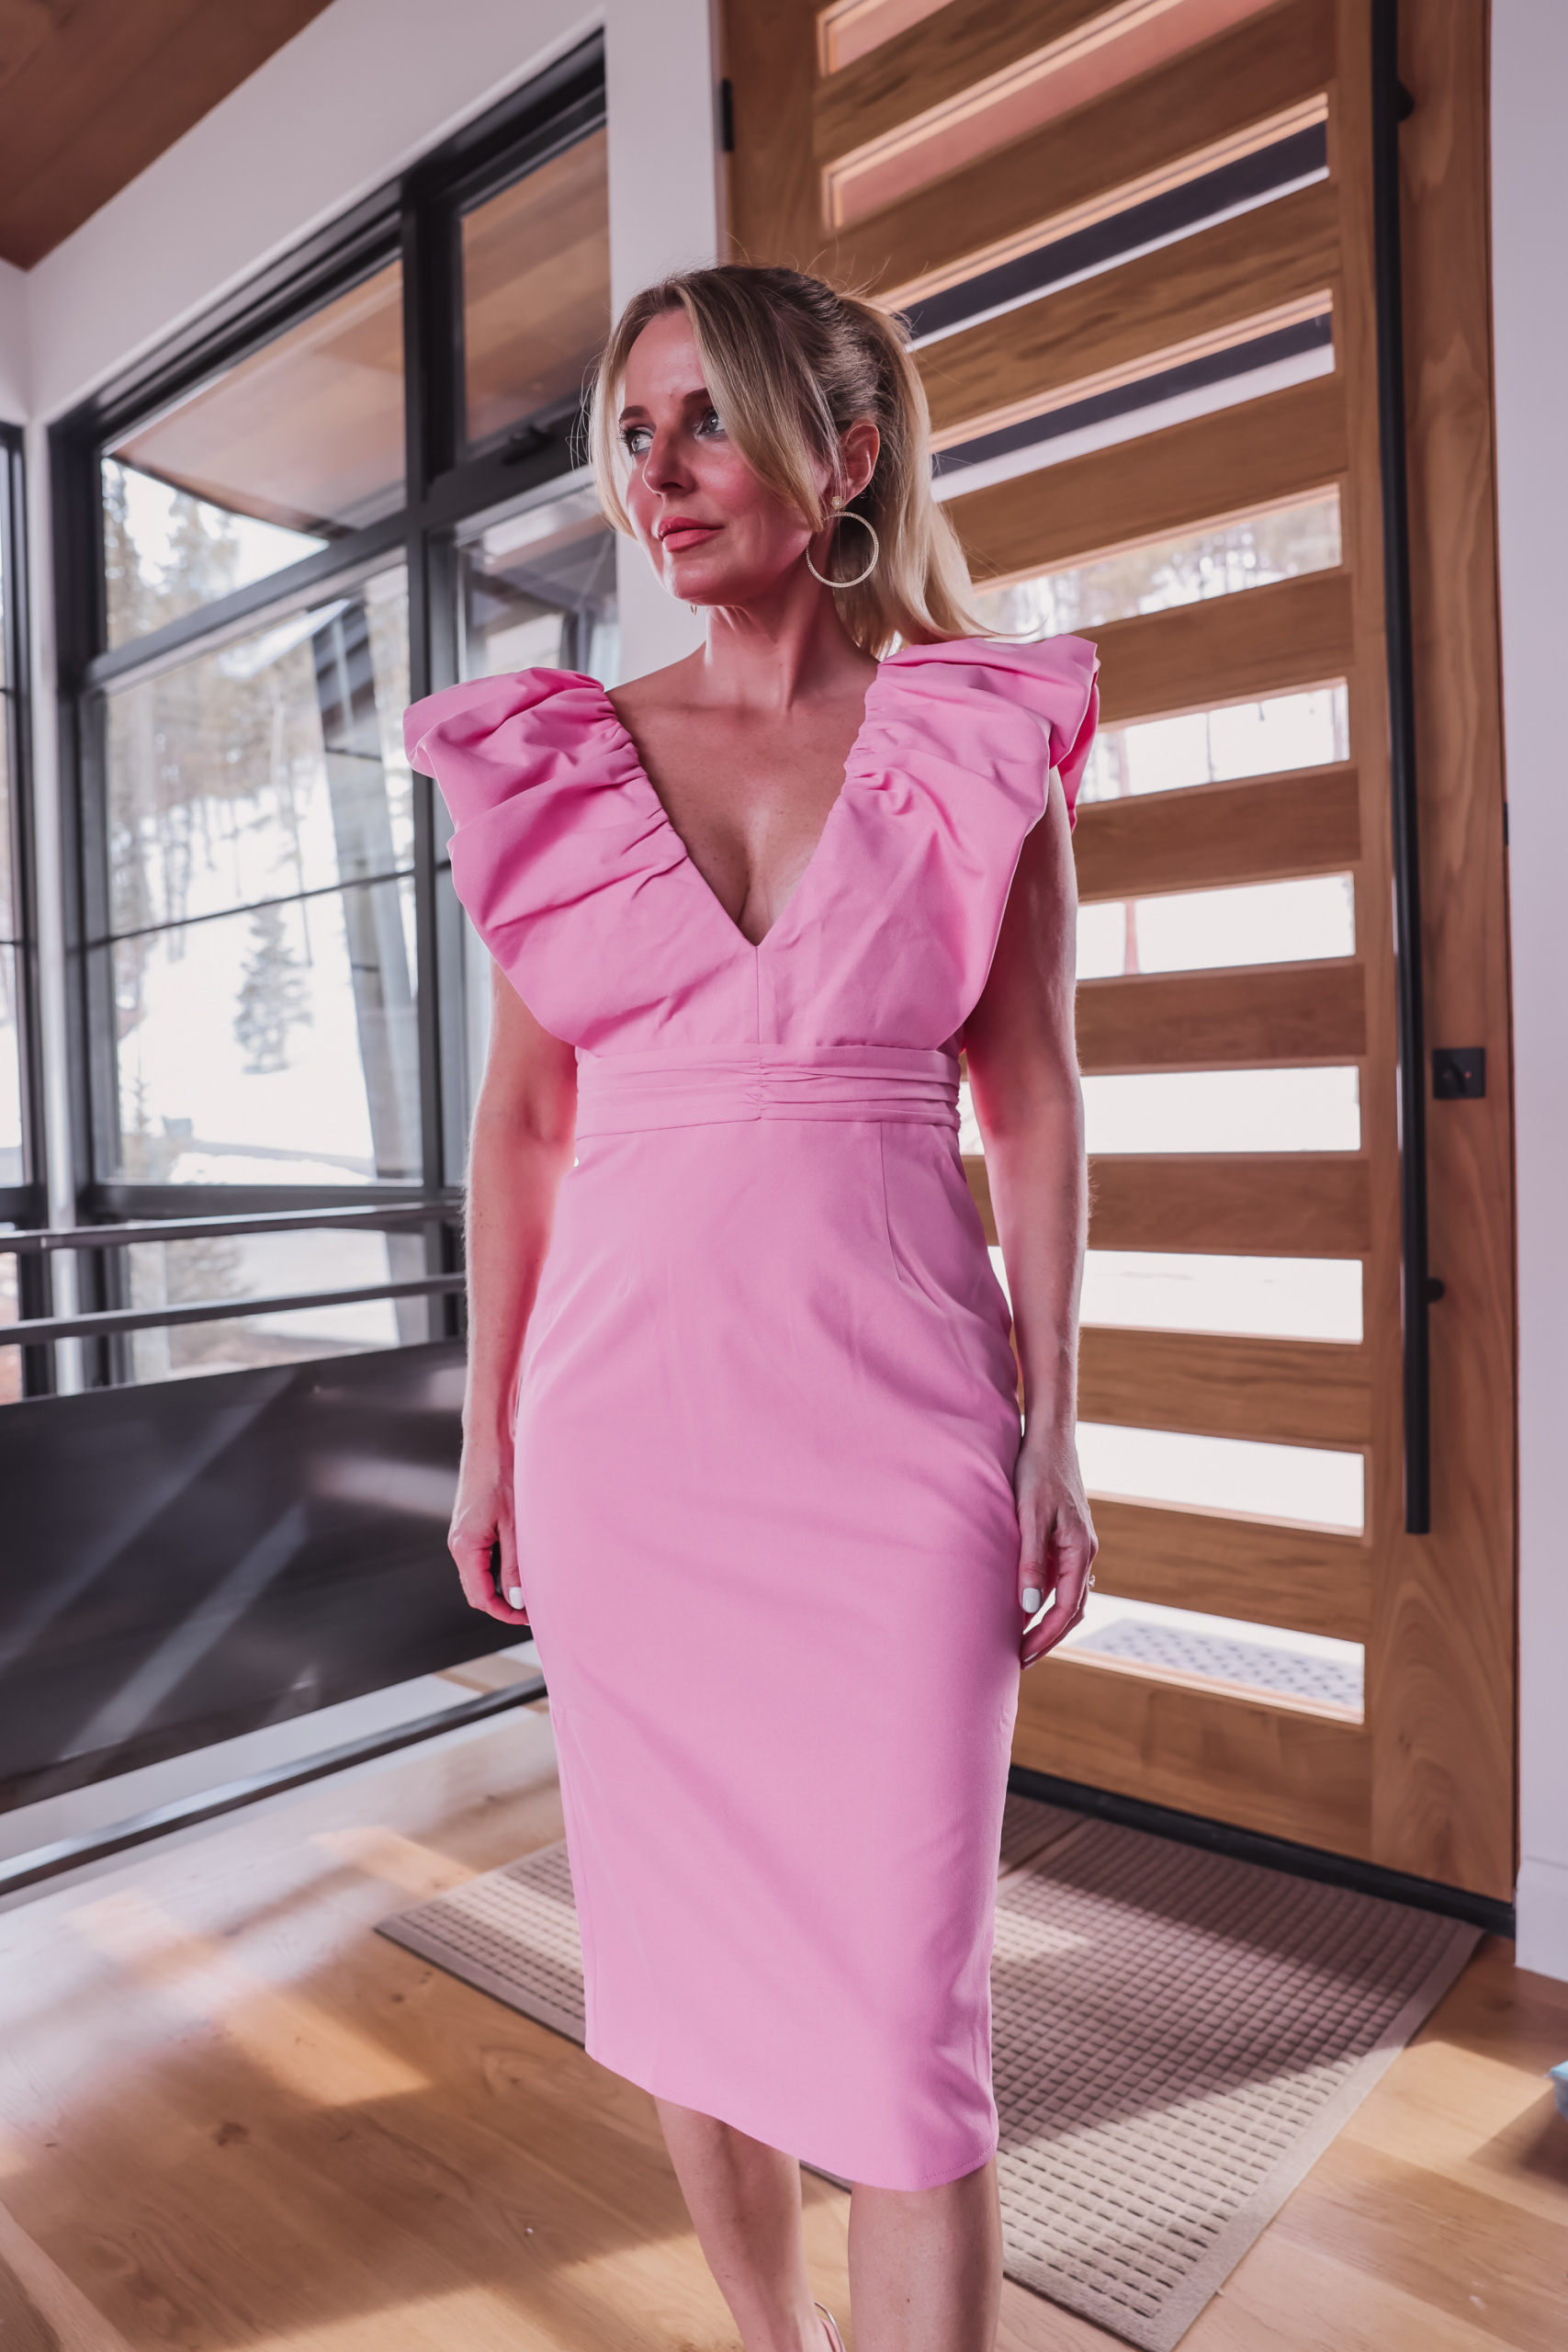 mother's day dresses, best mother's day dresses, mother's day dresses over 40, what to wear on mother's day, erin busbee, busbee style, telluride, colorado, pink elle Zeitoune sheath dress and mach & mach heels